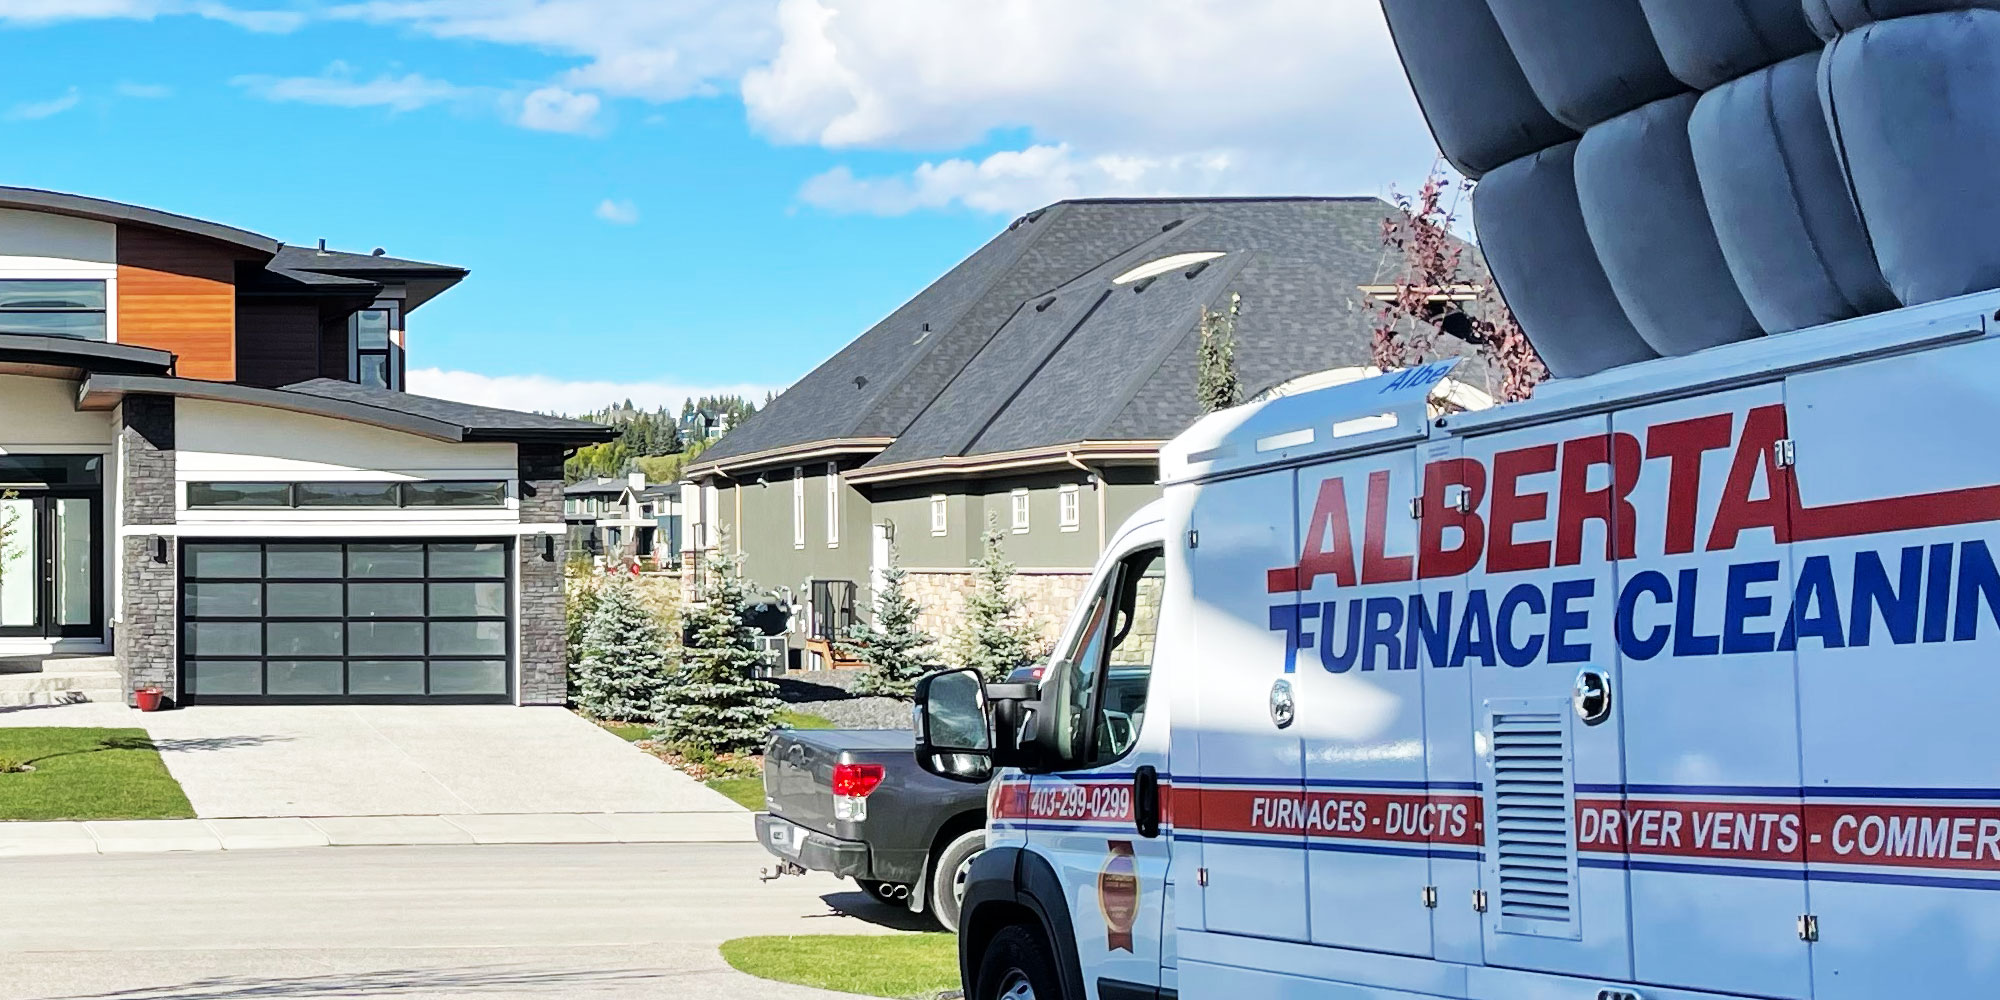 Furnace Cleaning Truck Calgary